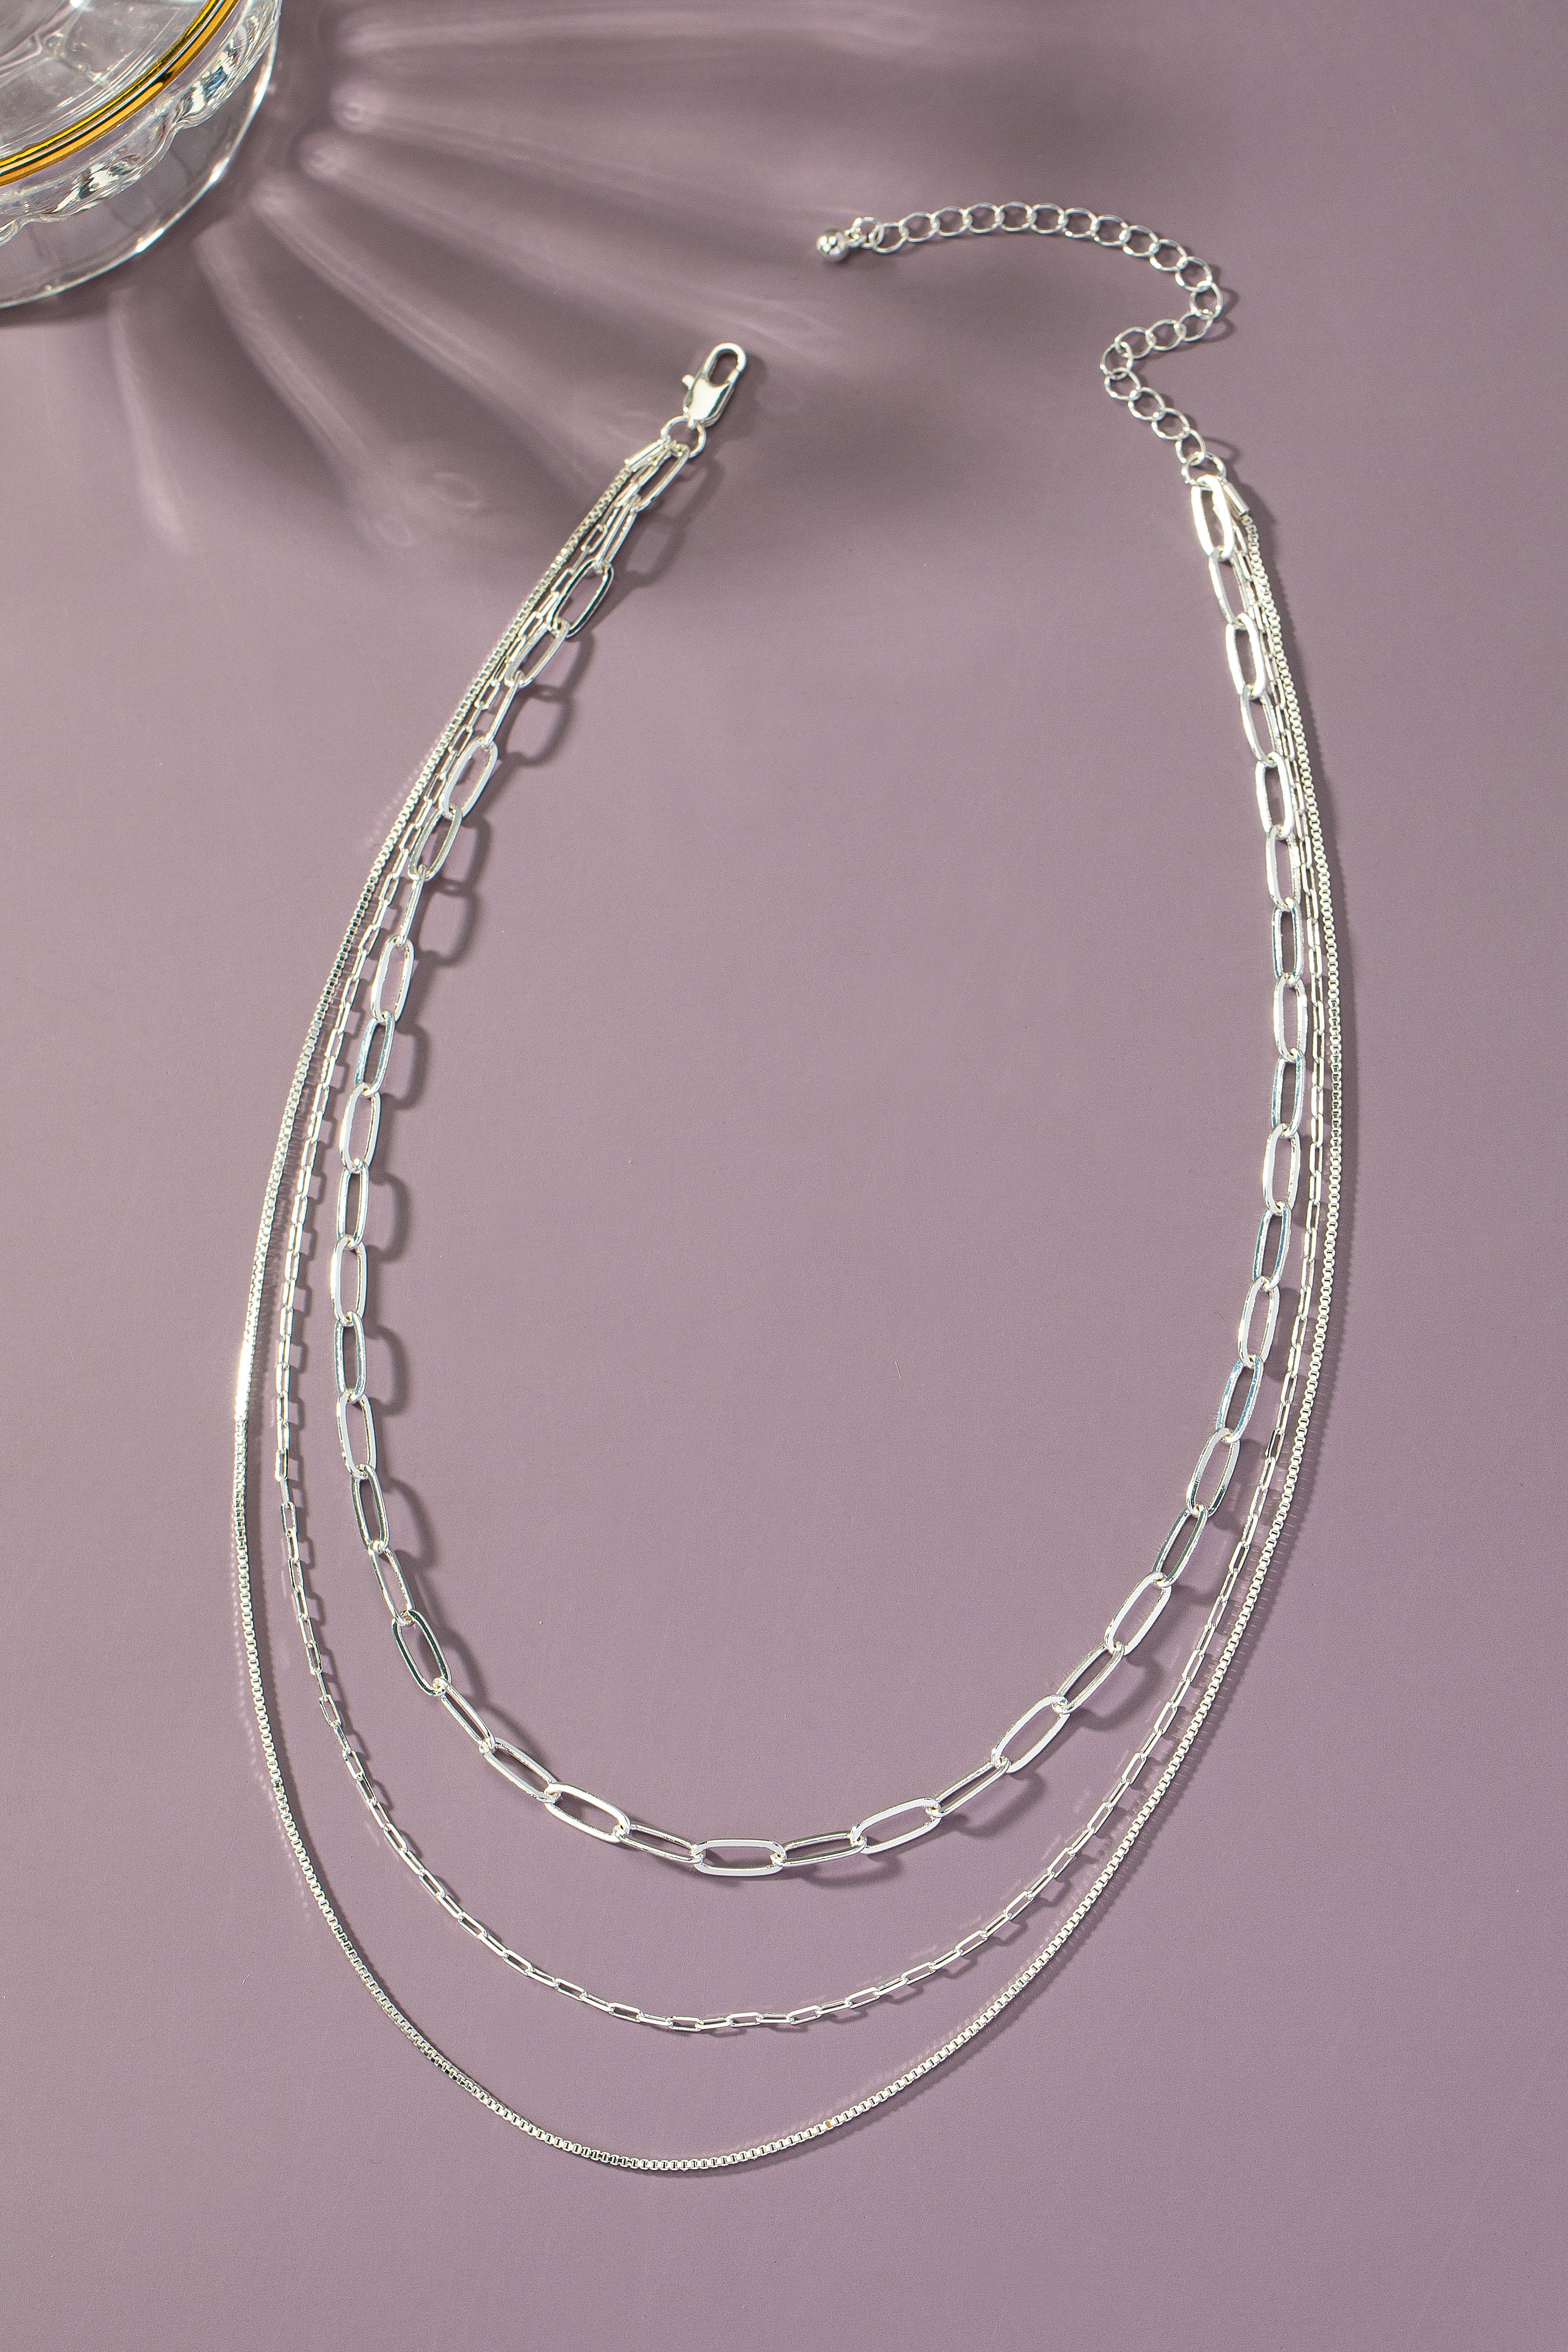 Layered Delicate Necklace In Silver - Infinity Raine